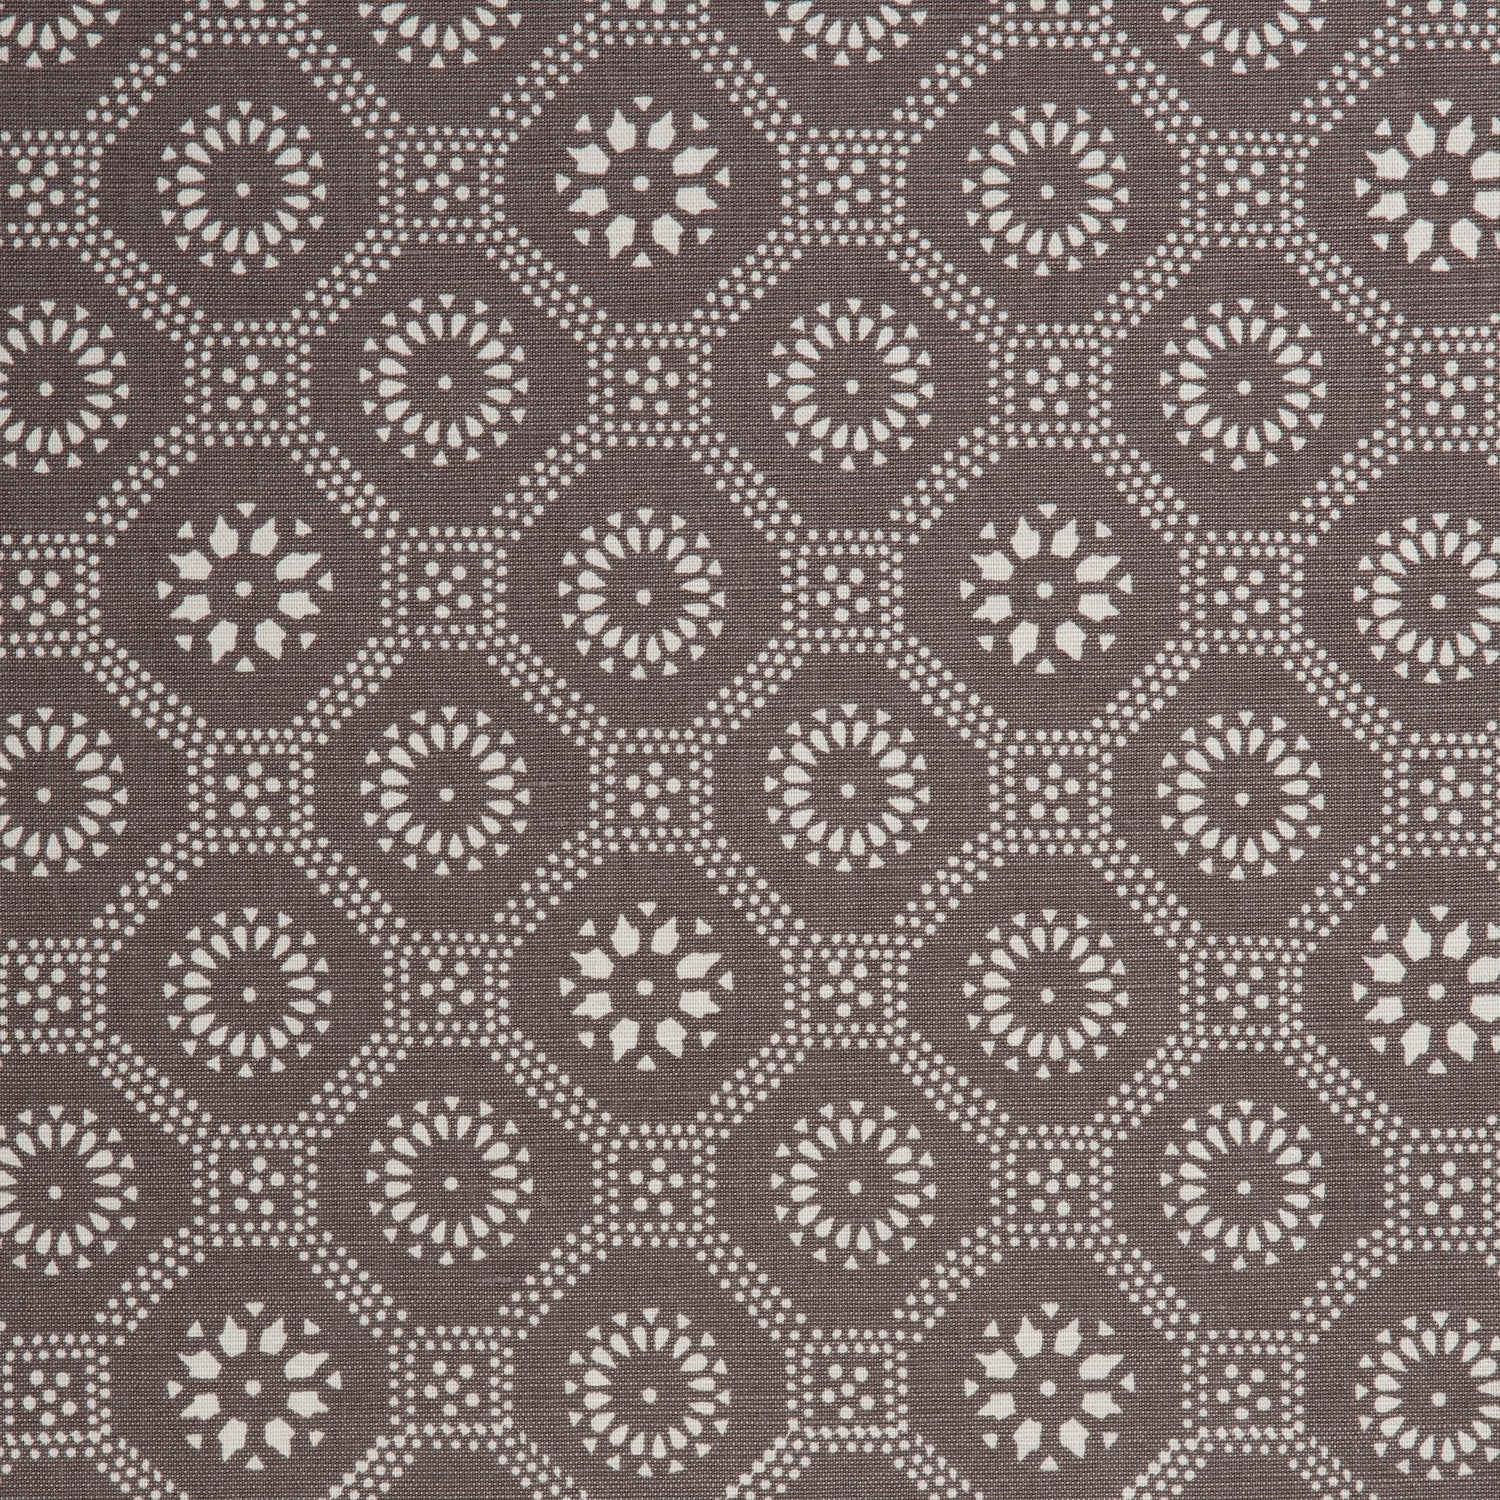 Detail of a cotton fabric in a floral gridded honeycomb pattern in white on a brown field.